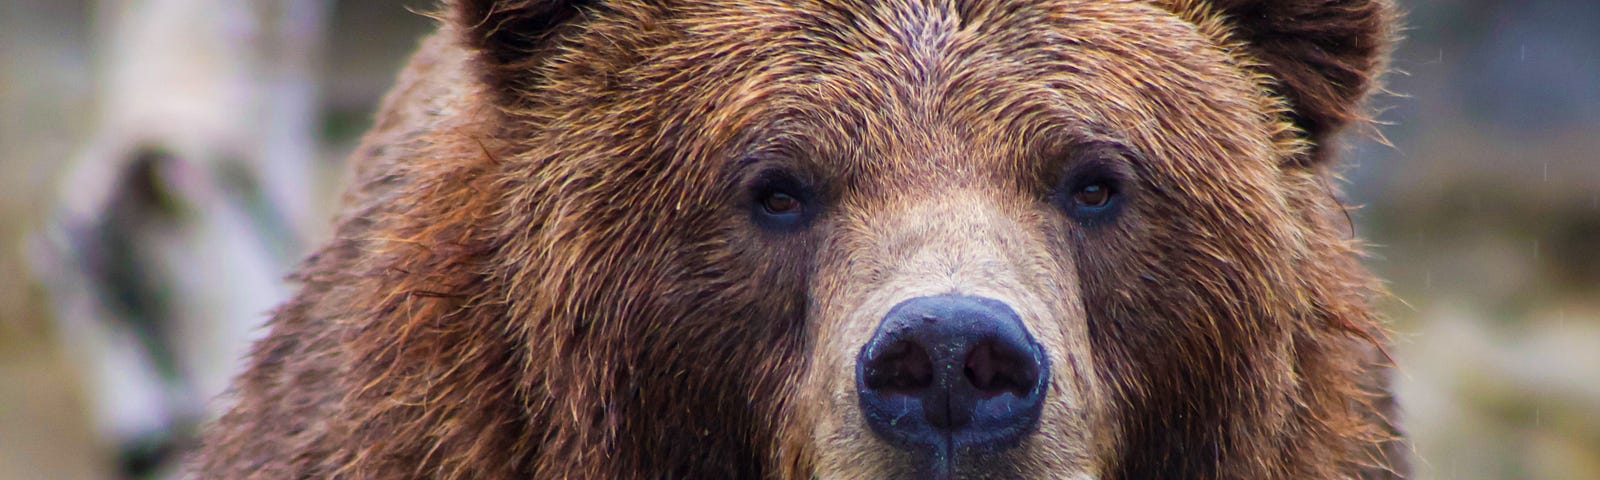 A brown grizzly bear staring at the camera.